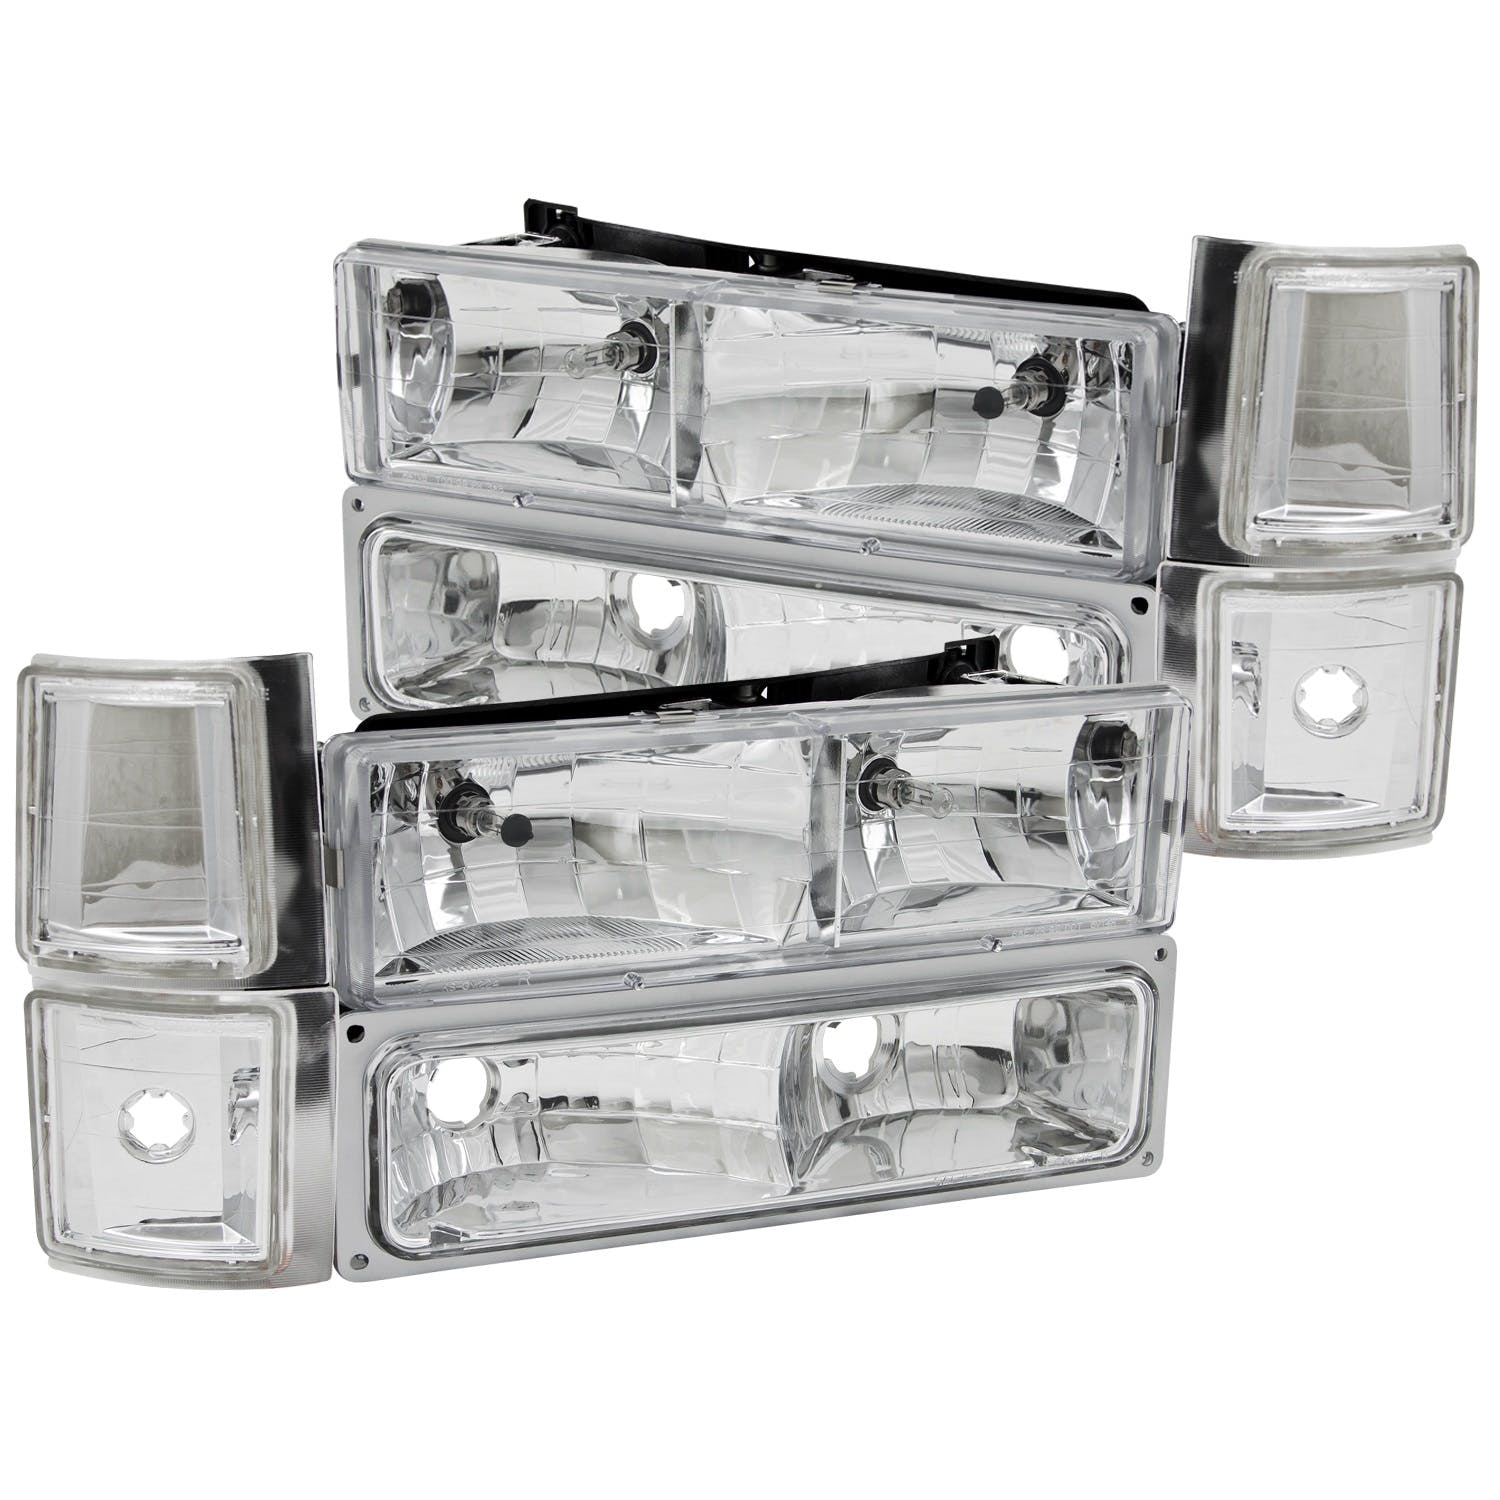 AnzoUSA 111099 Crystal Headlights Chrome with Signal and Side Marker Lights